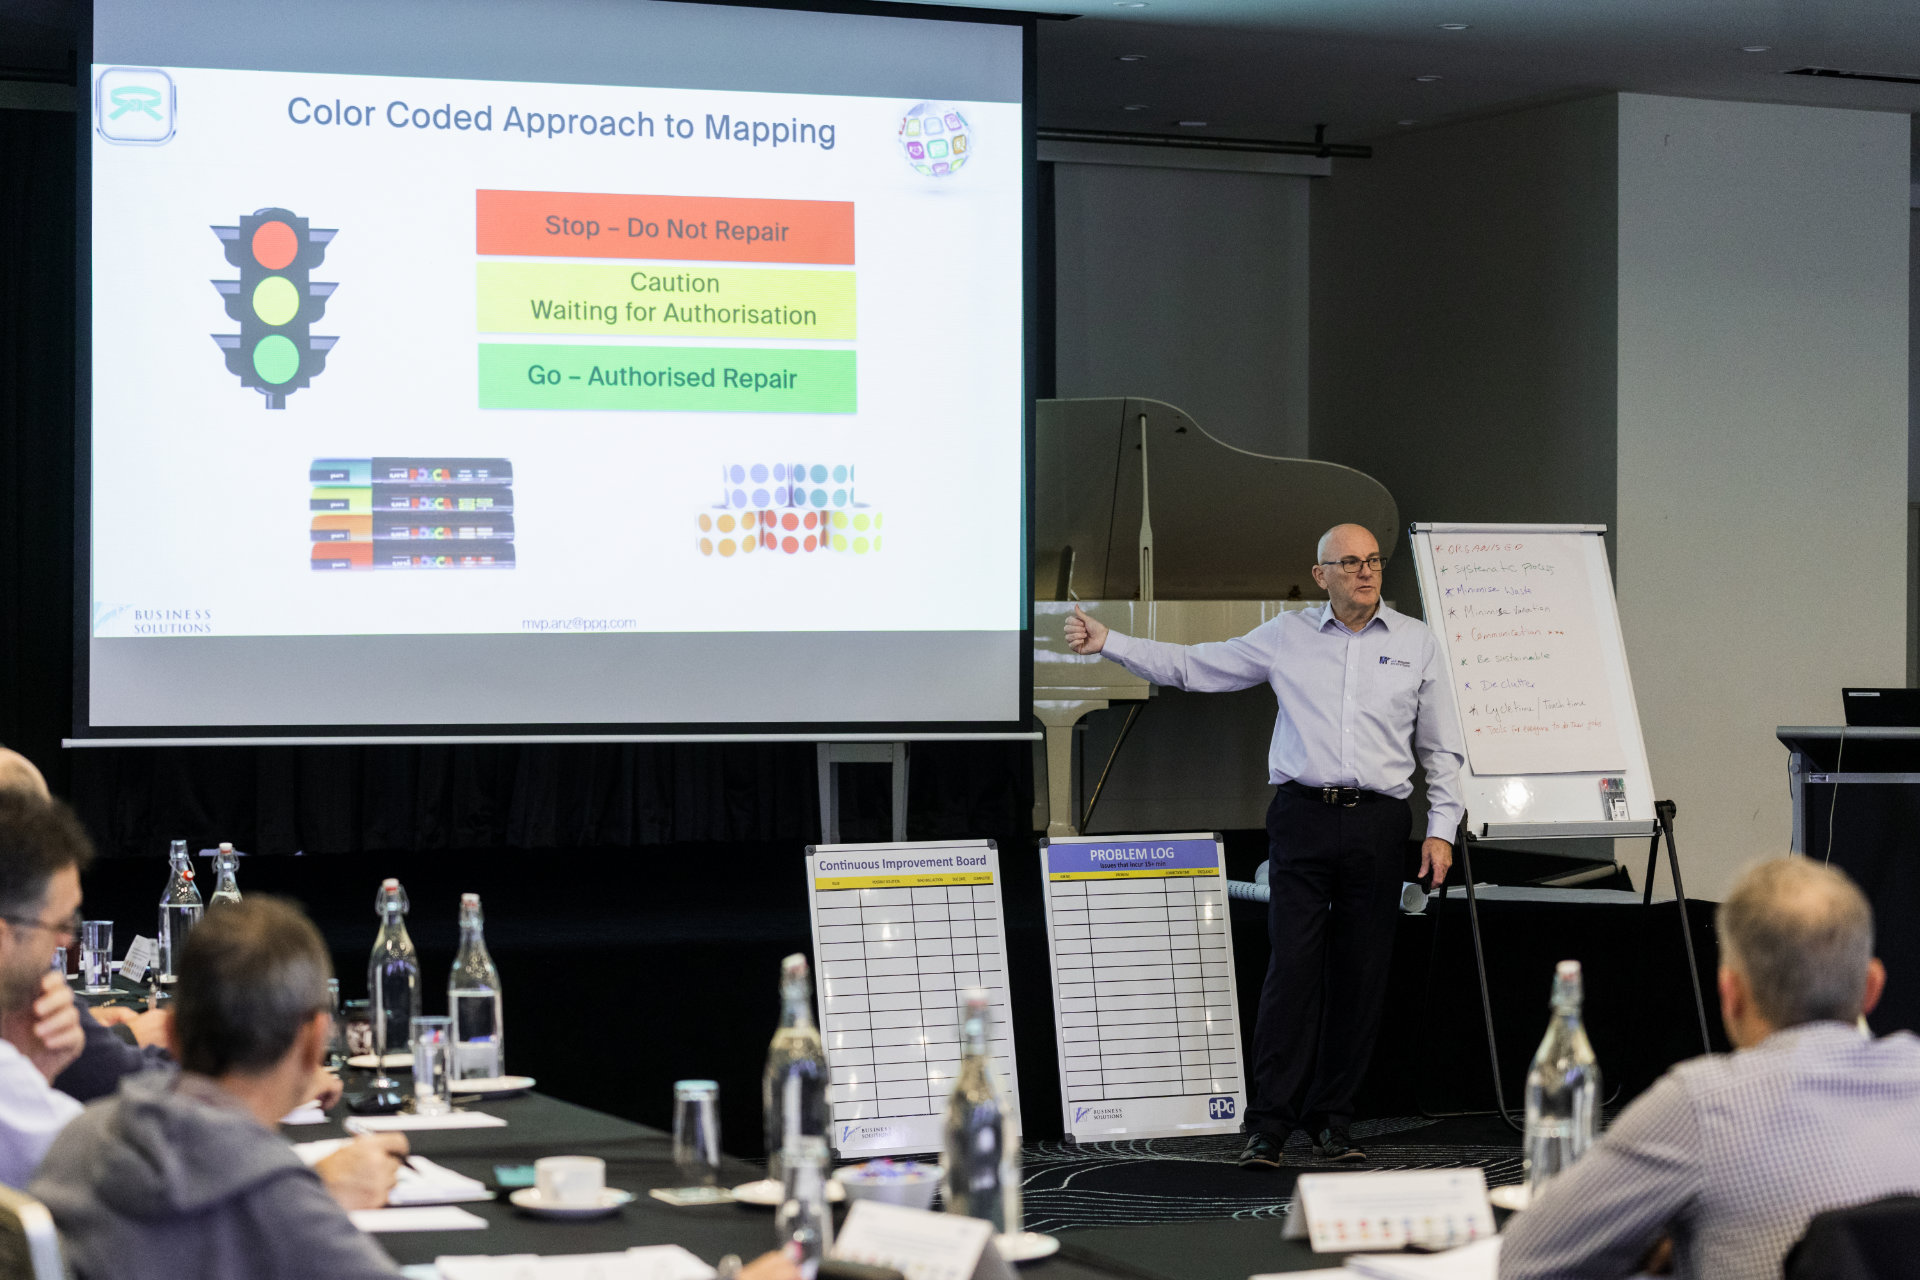 PPG Australia Delivers First Green Belt Training Course